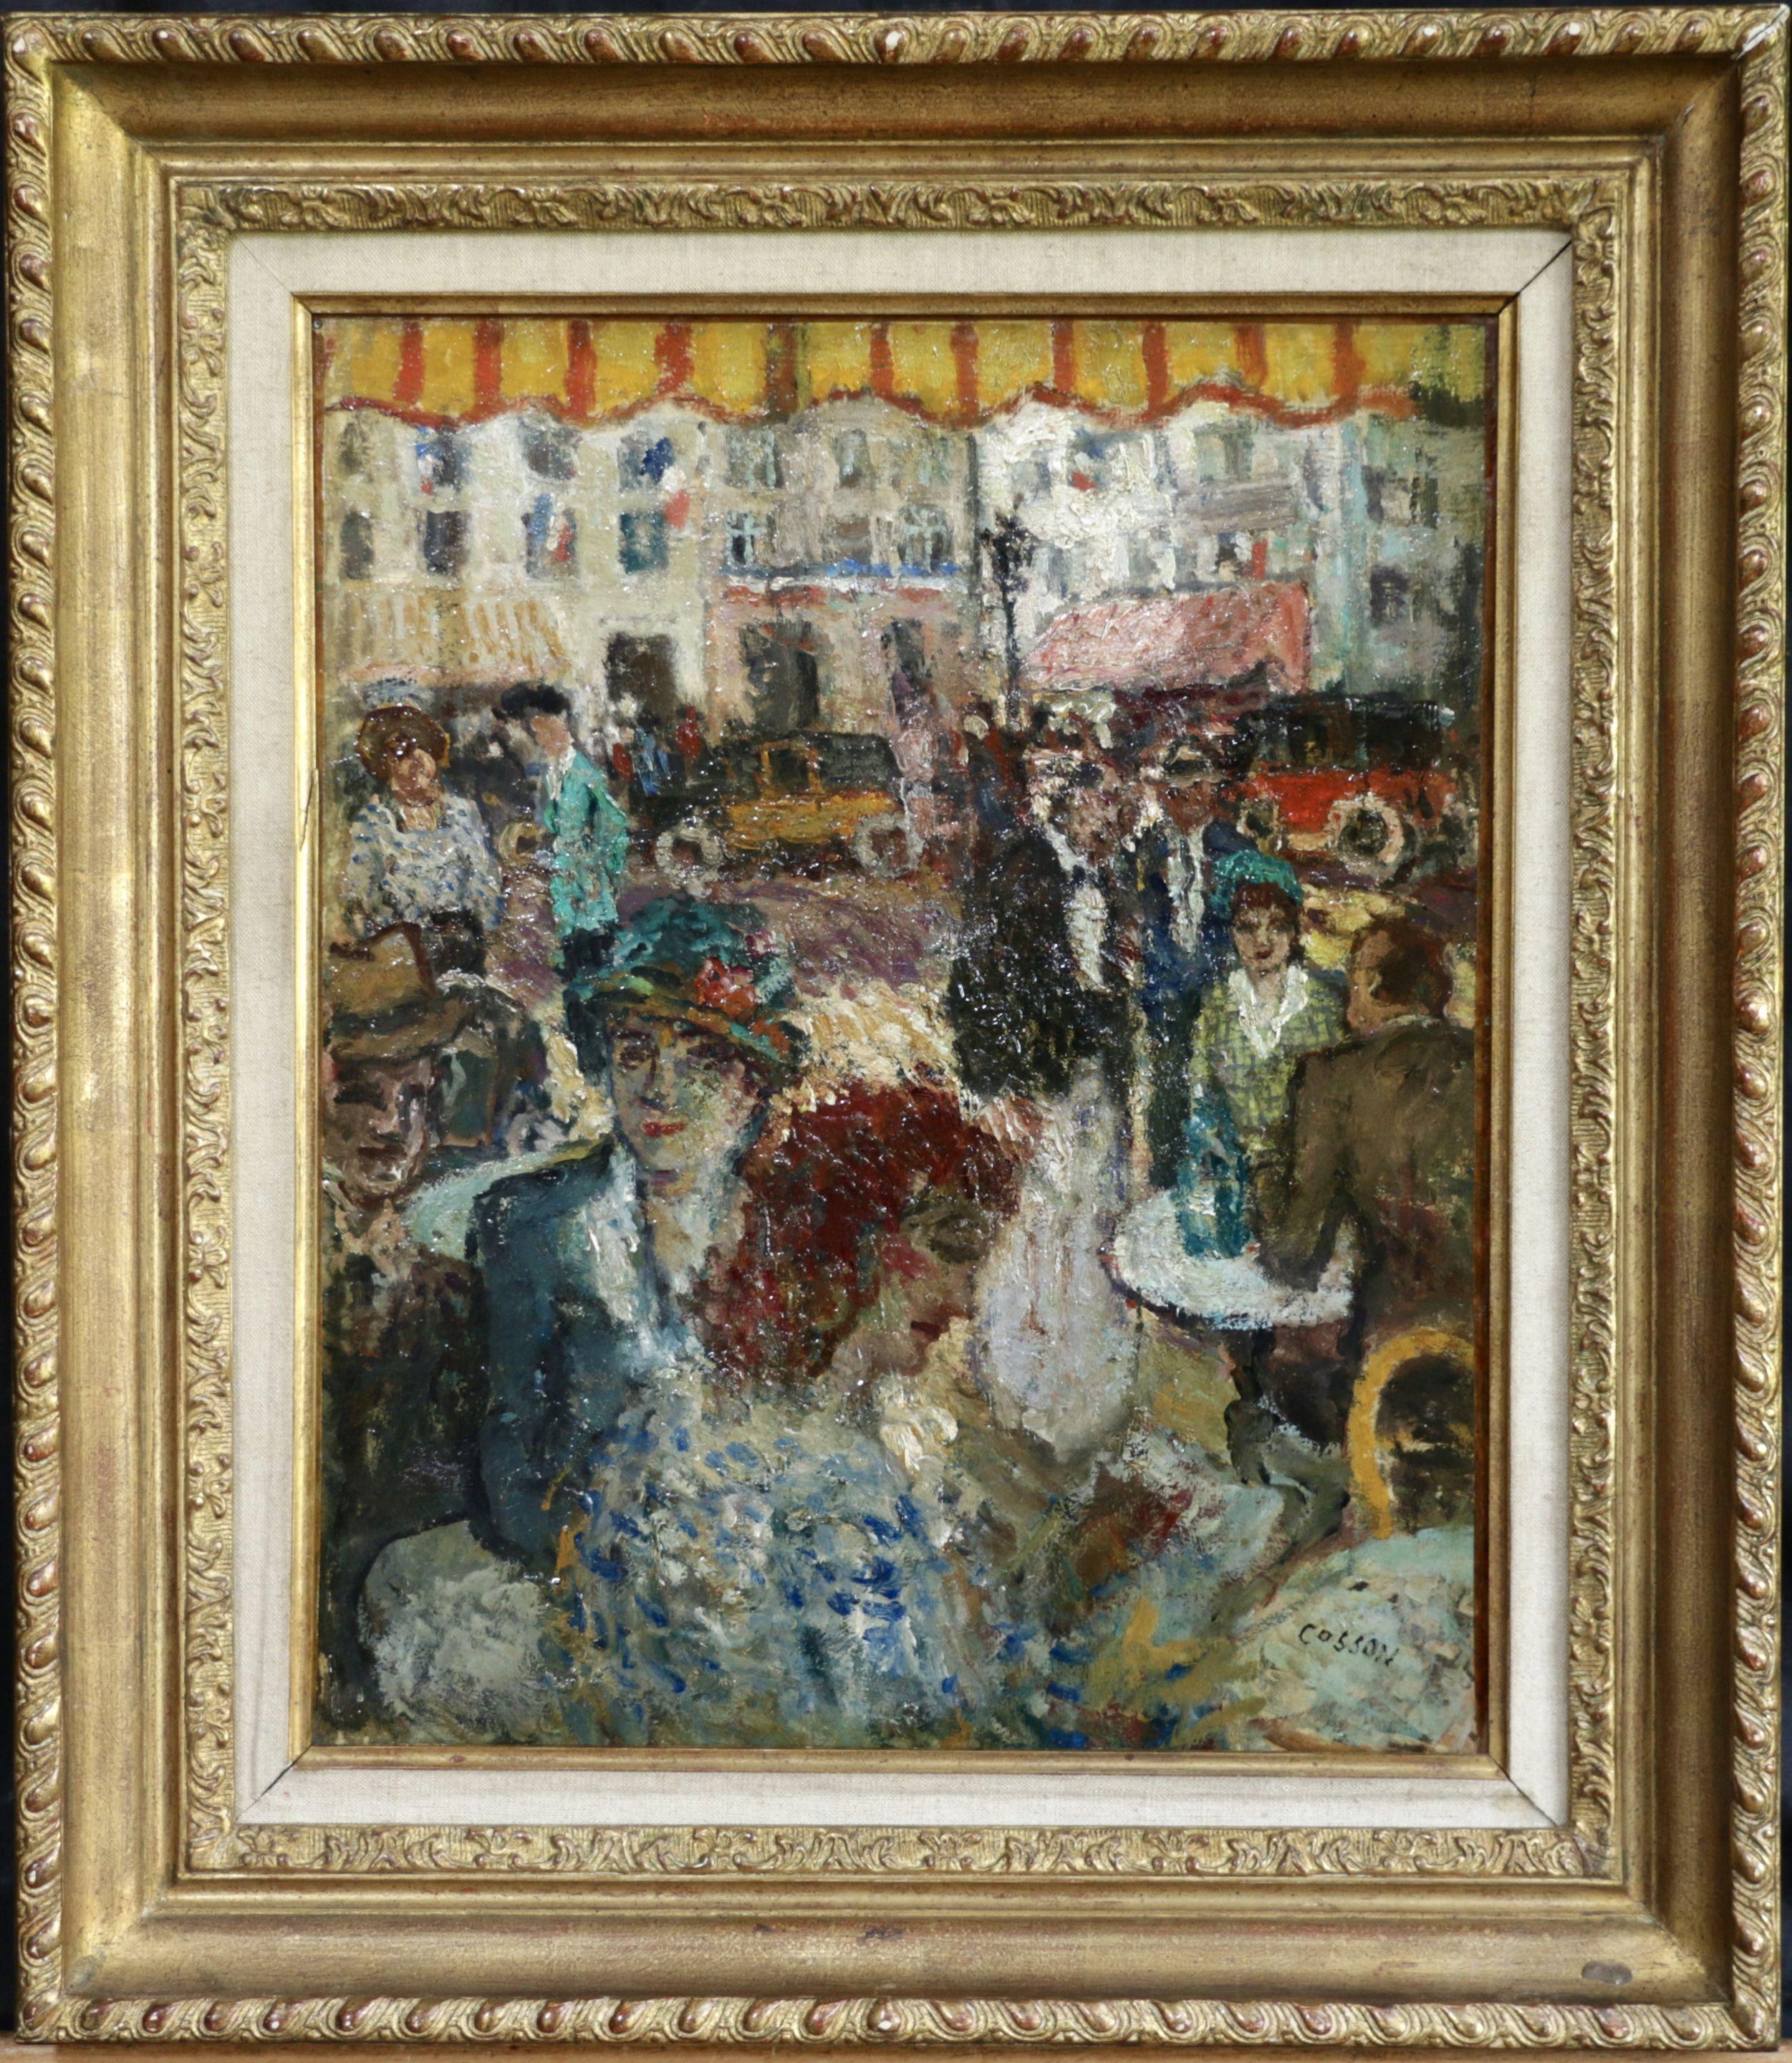 A Parisian Cafe - Painting by Jean-Louis-Marcel Cosson